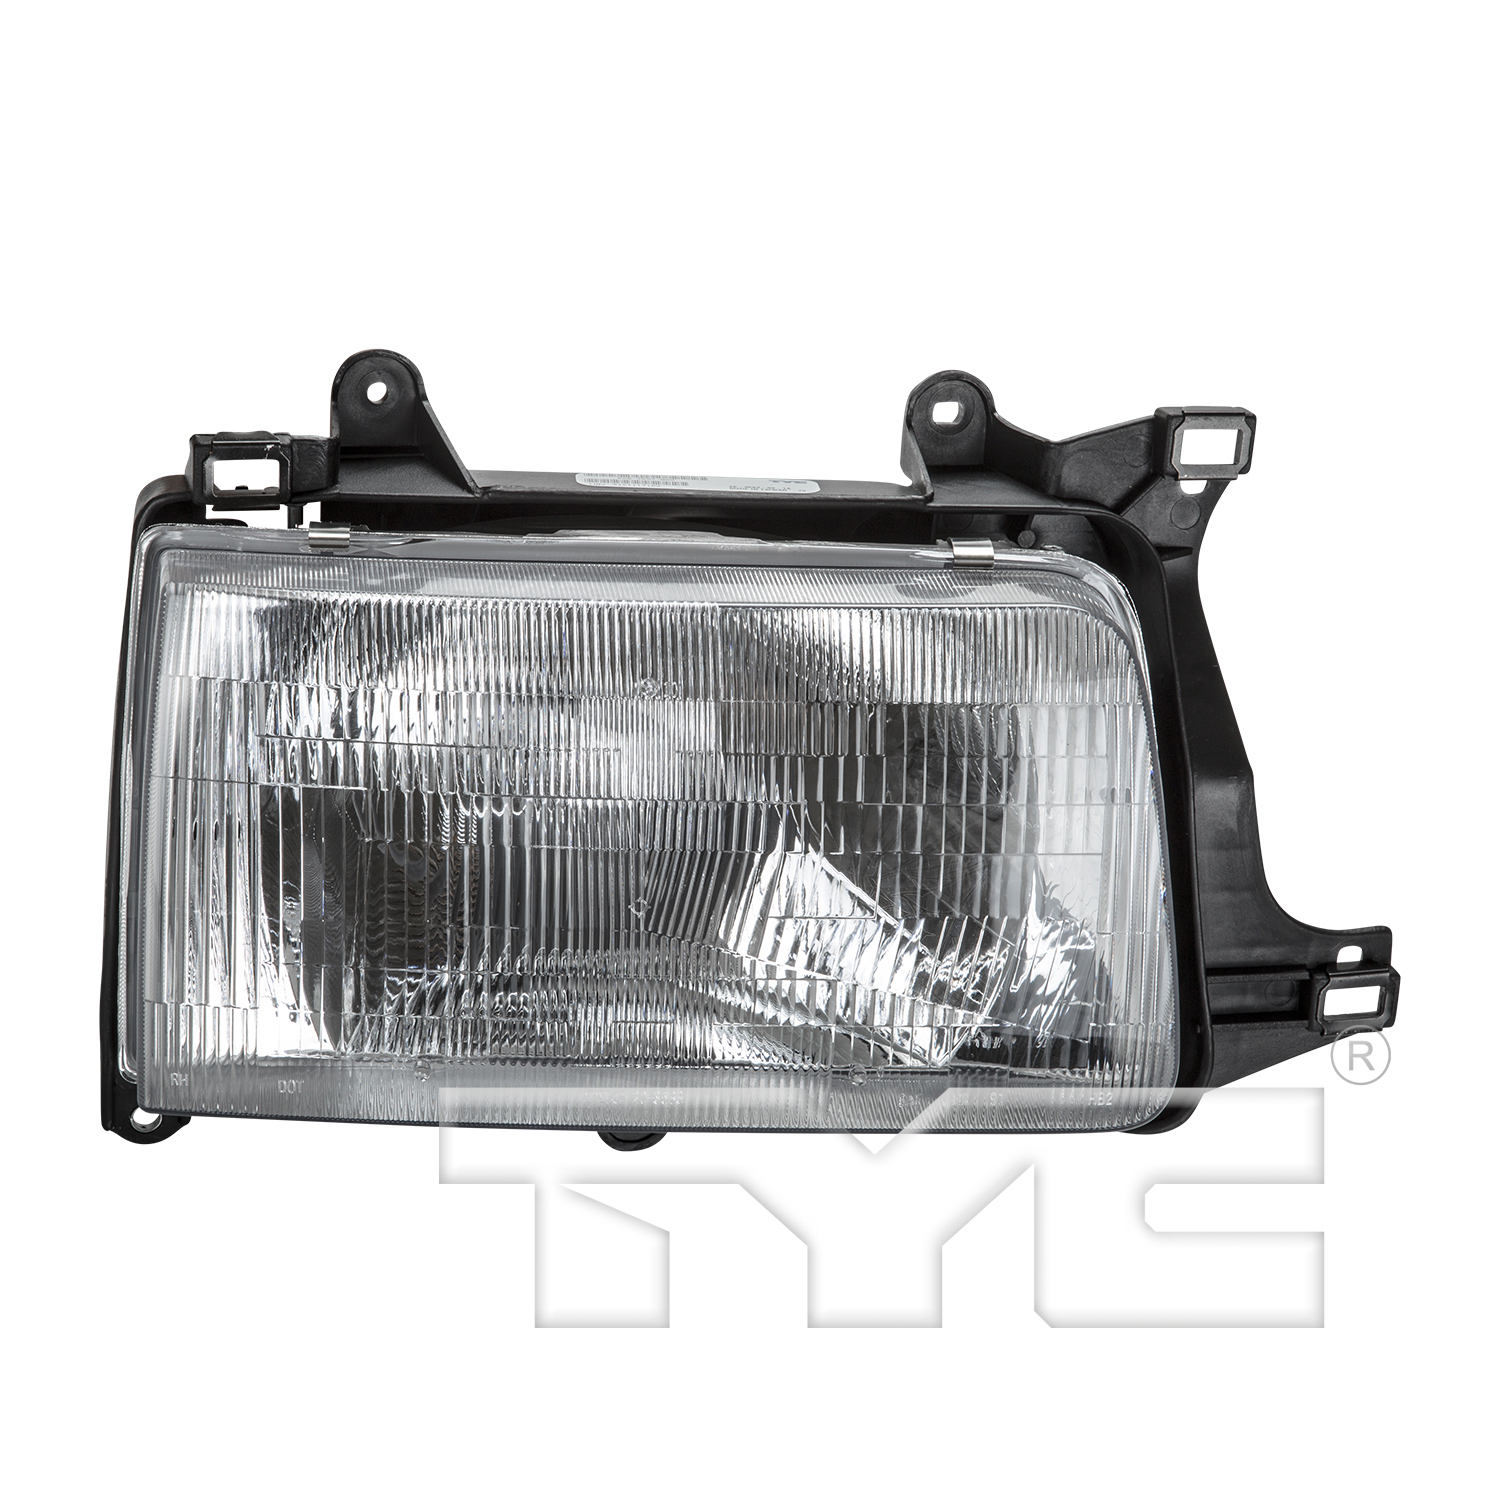 Aftermarket HEADLIGHTS for TOYOTA - T100, T100,93-98,RT Headlamp assy composite